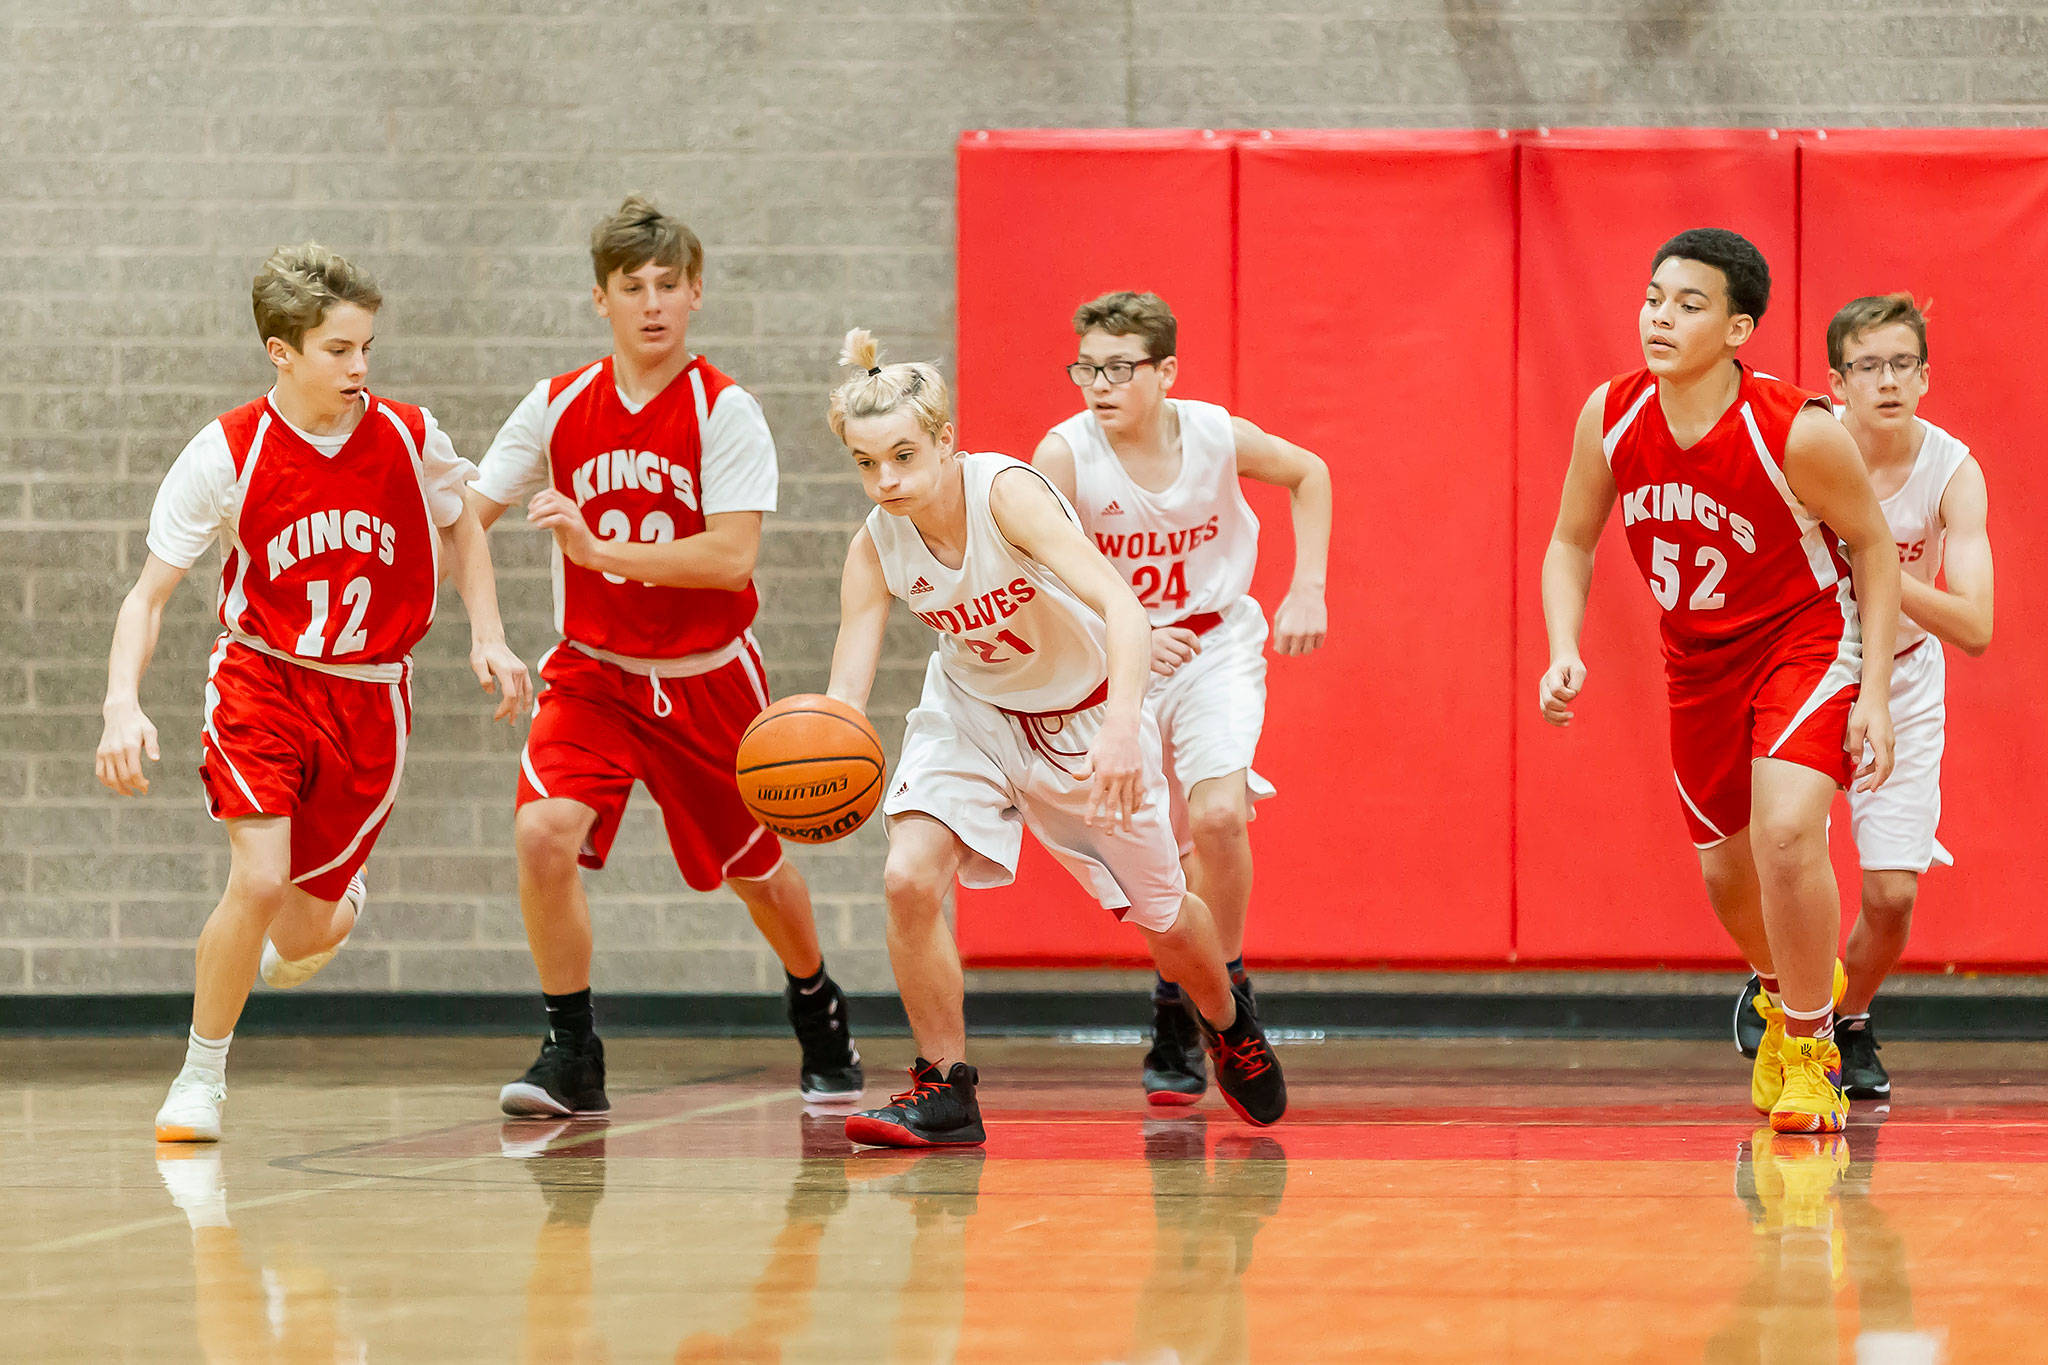 The Coupeville Middle School boys basketball teams opened the season with King’s this week. (Photo by John Fisken)